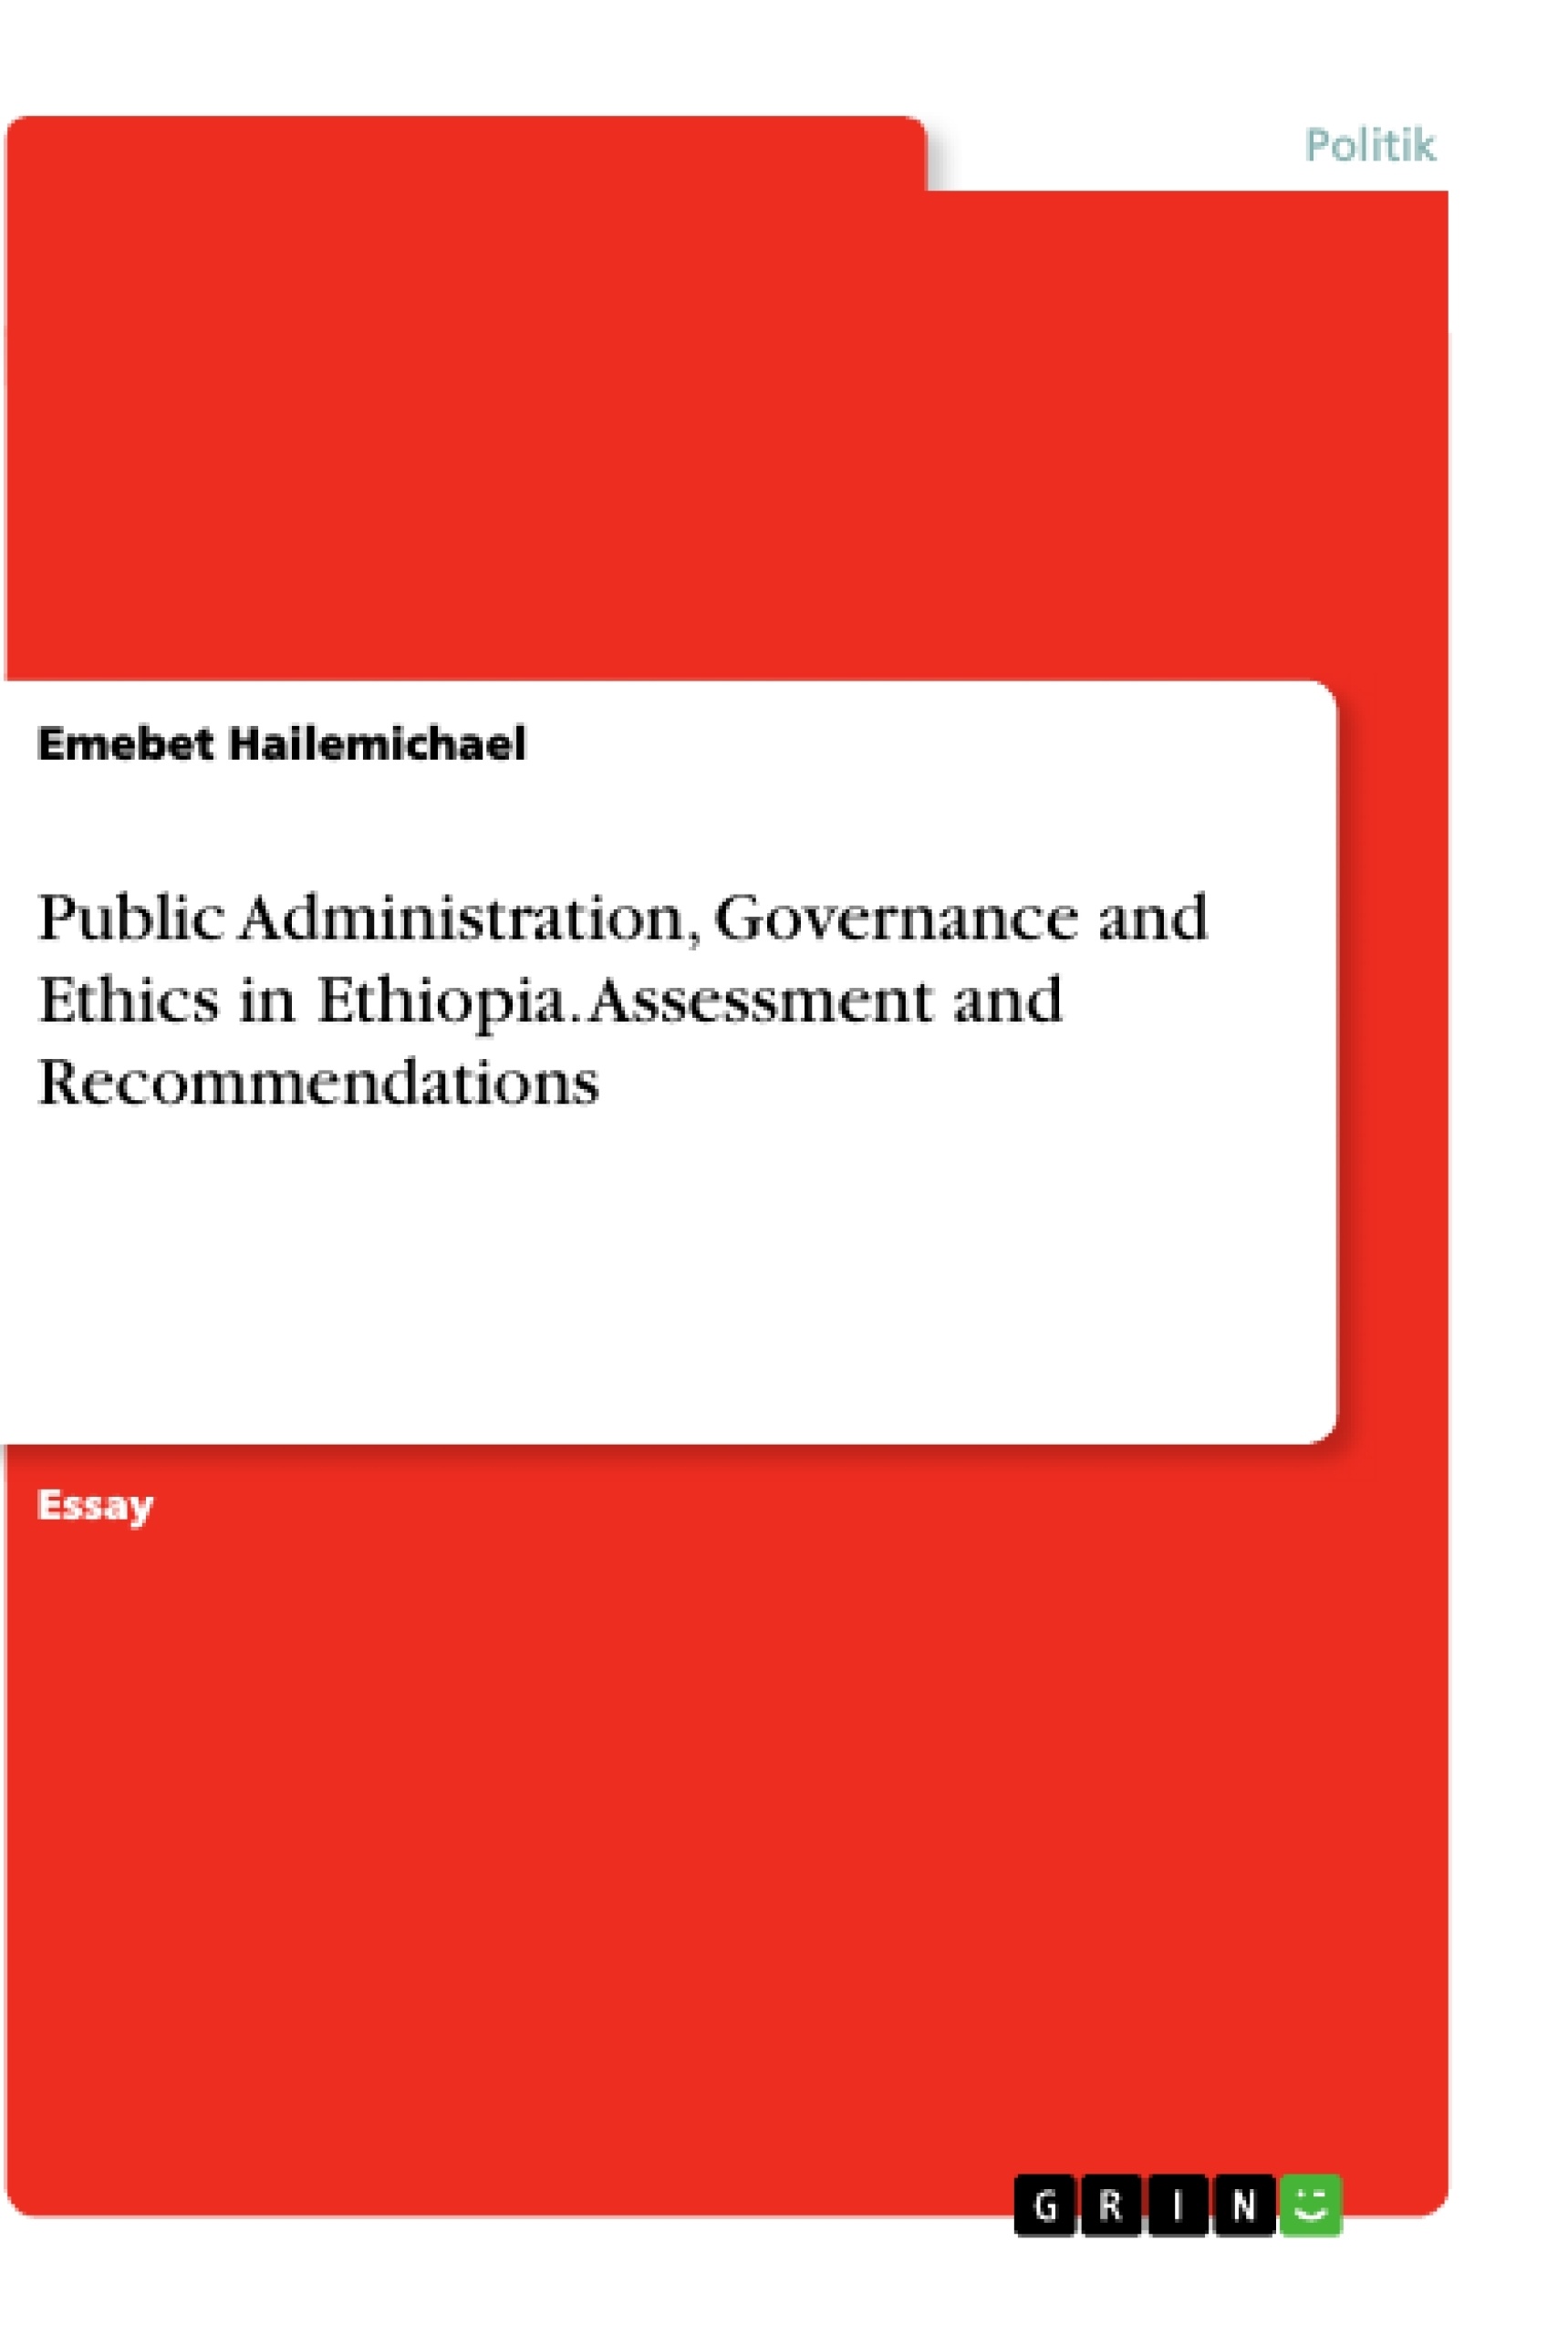 Título: Public Administration, Governance and Ethics in Ethiopia. Assessment and Recommendations